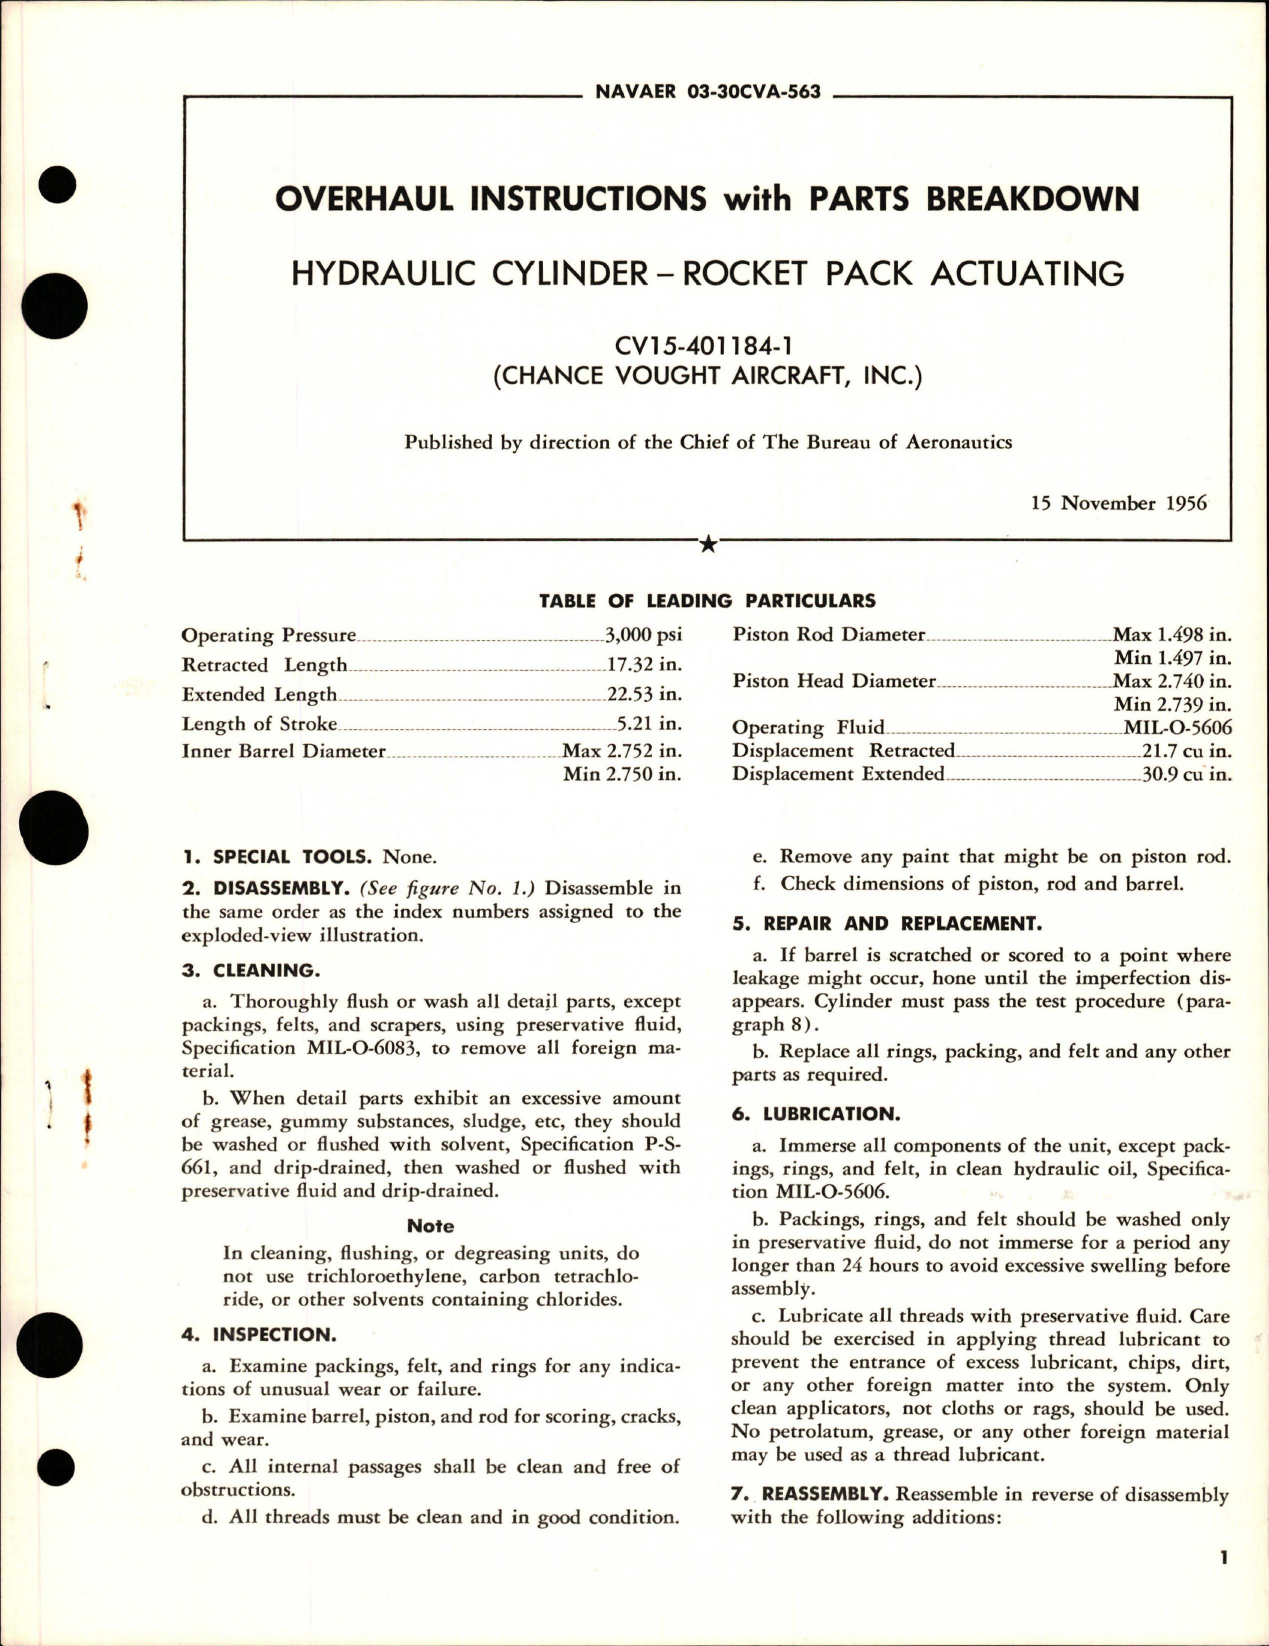 Sample page 1 from AirCorps Library document: Overhaul Instructions with Parts Breakdown for Rocket Pack Actuating Hydraulic Cylinder - CV15-401184-1